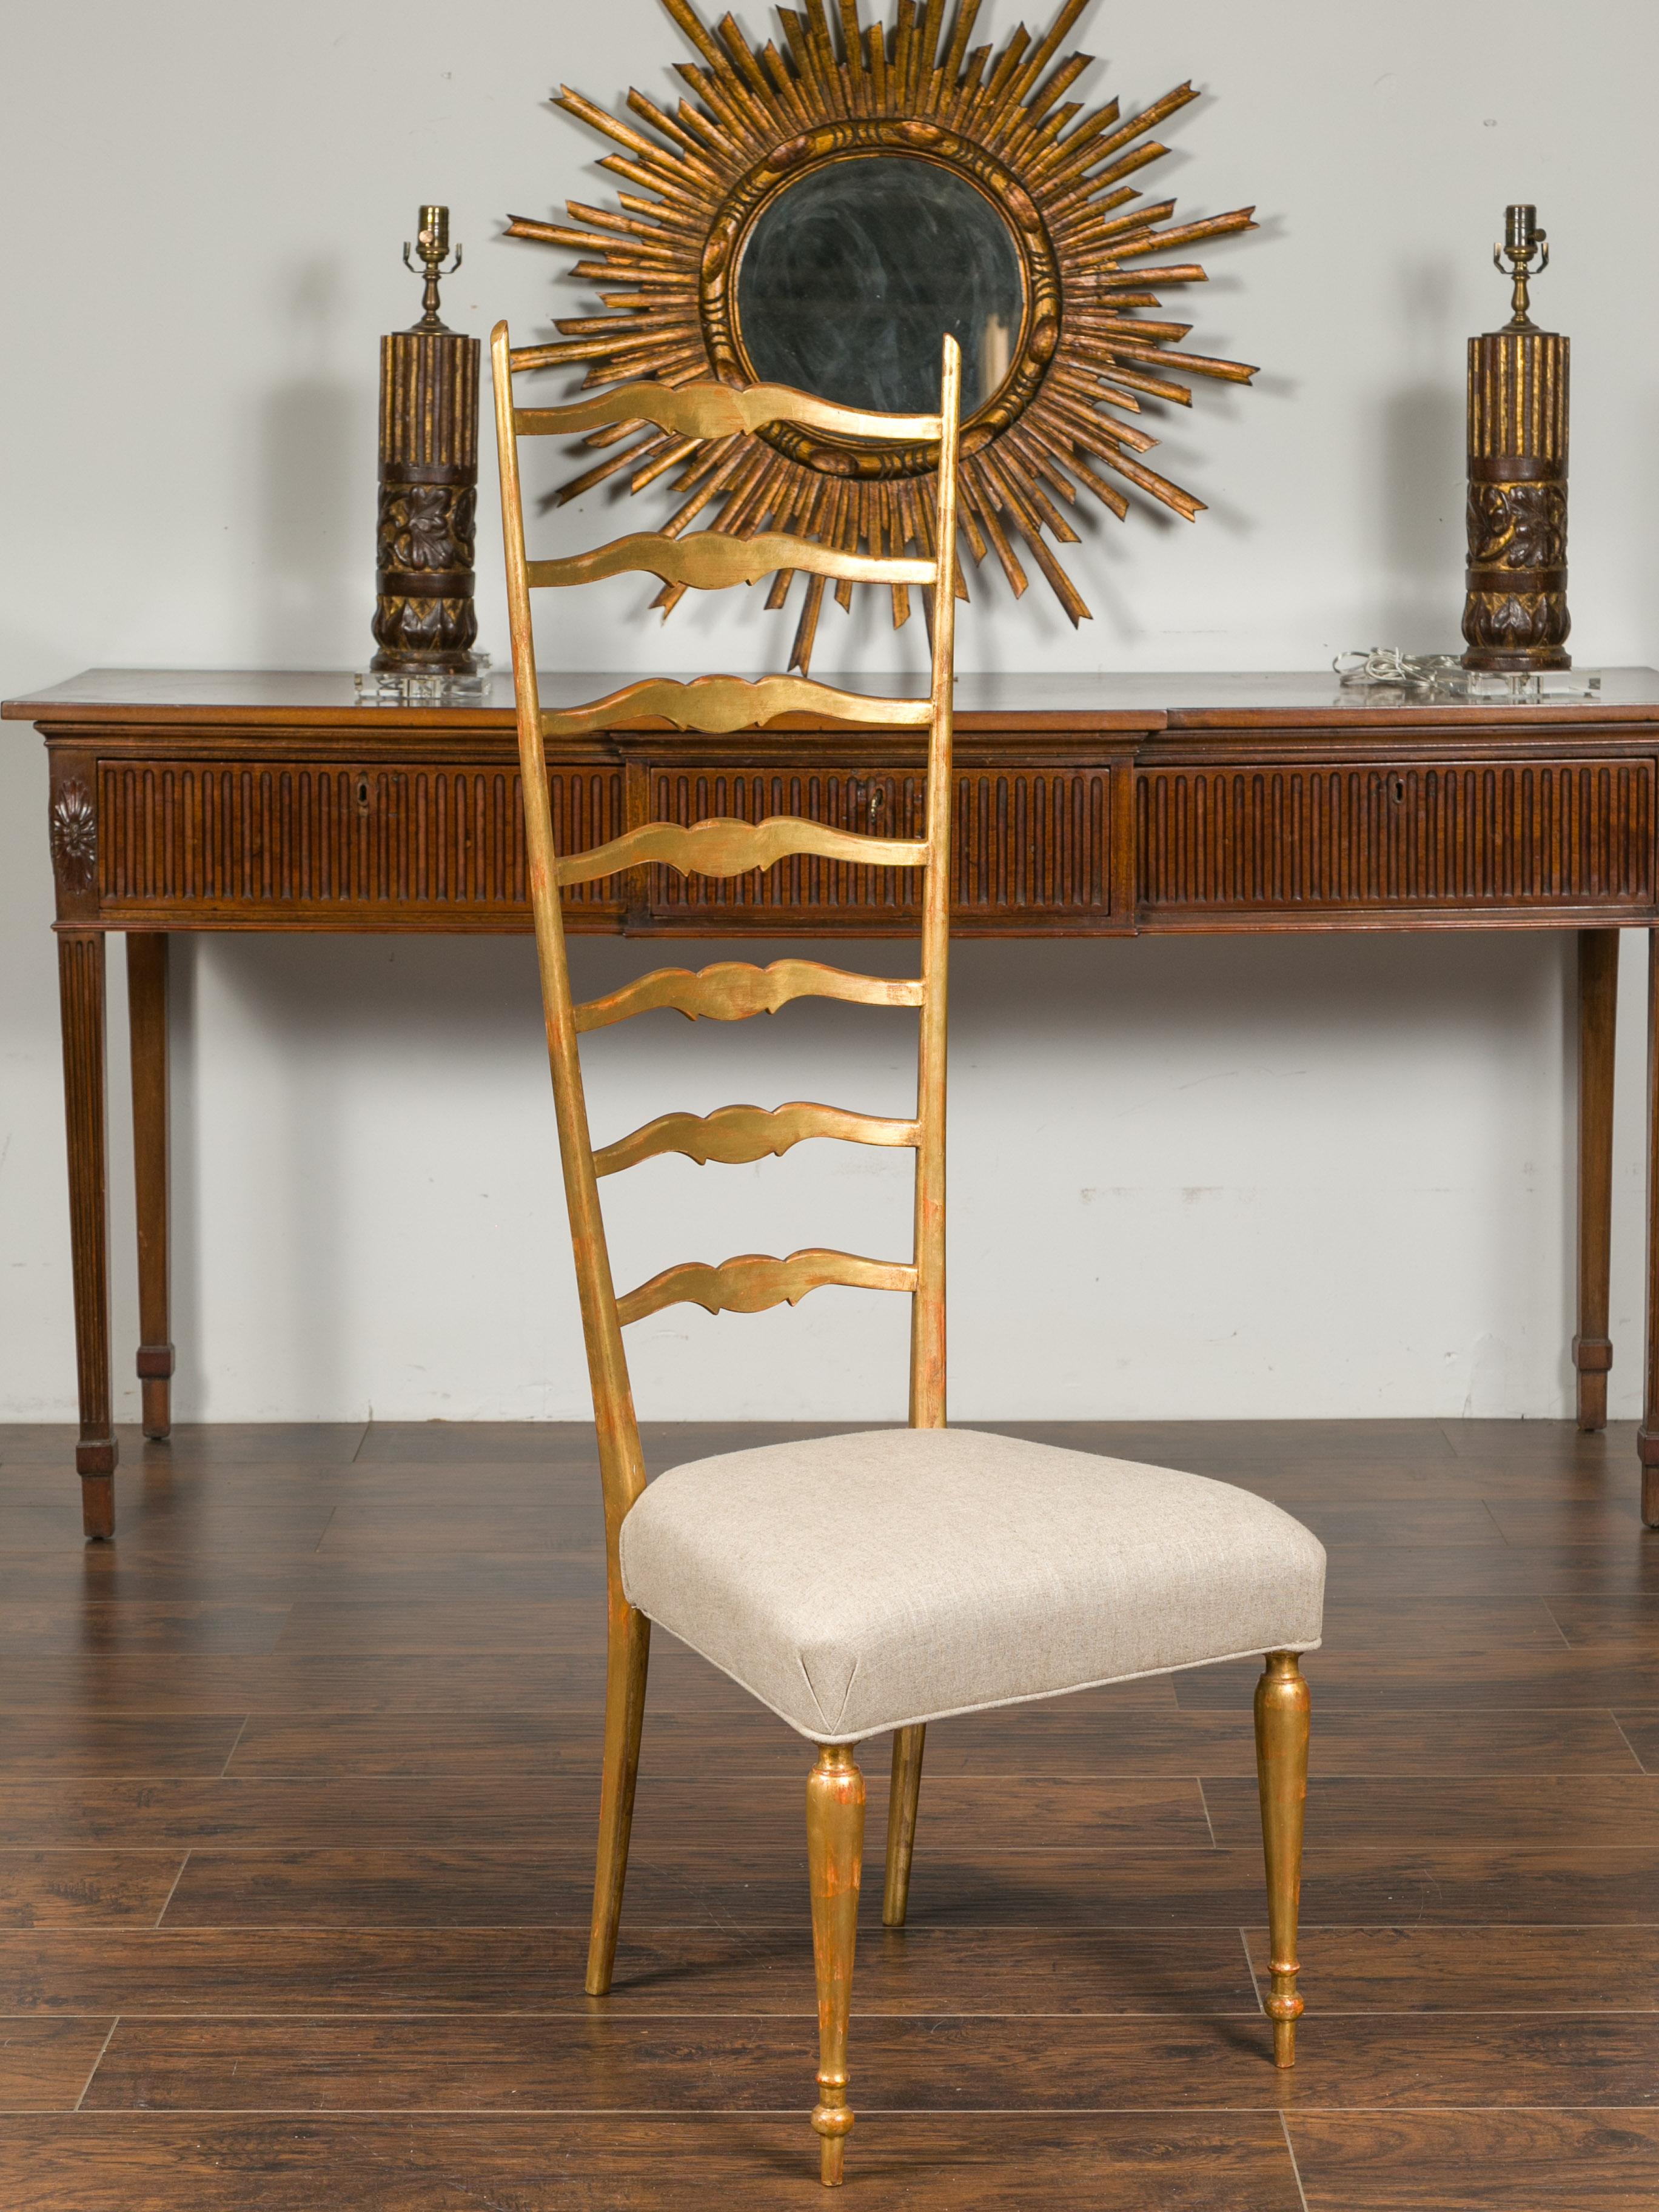 Midcentury Italian Giltwood High Ladder Back Chair with New Upholstery In Good Condition For Sale In Atlanta, GA